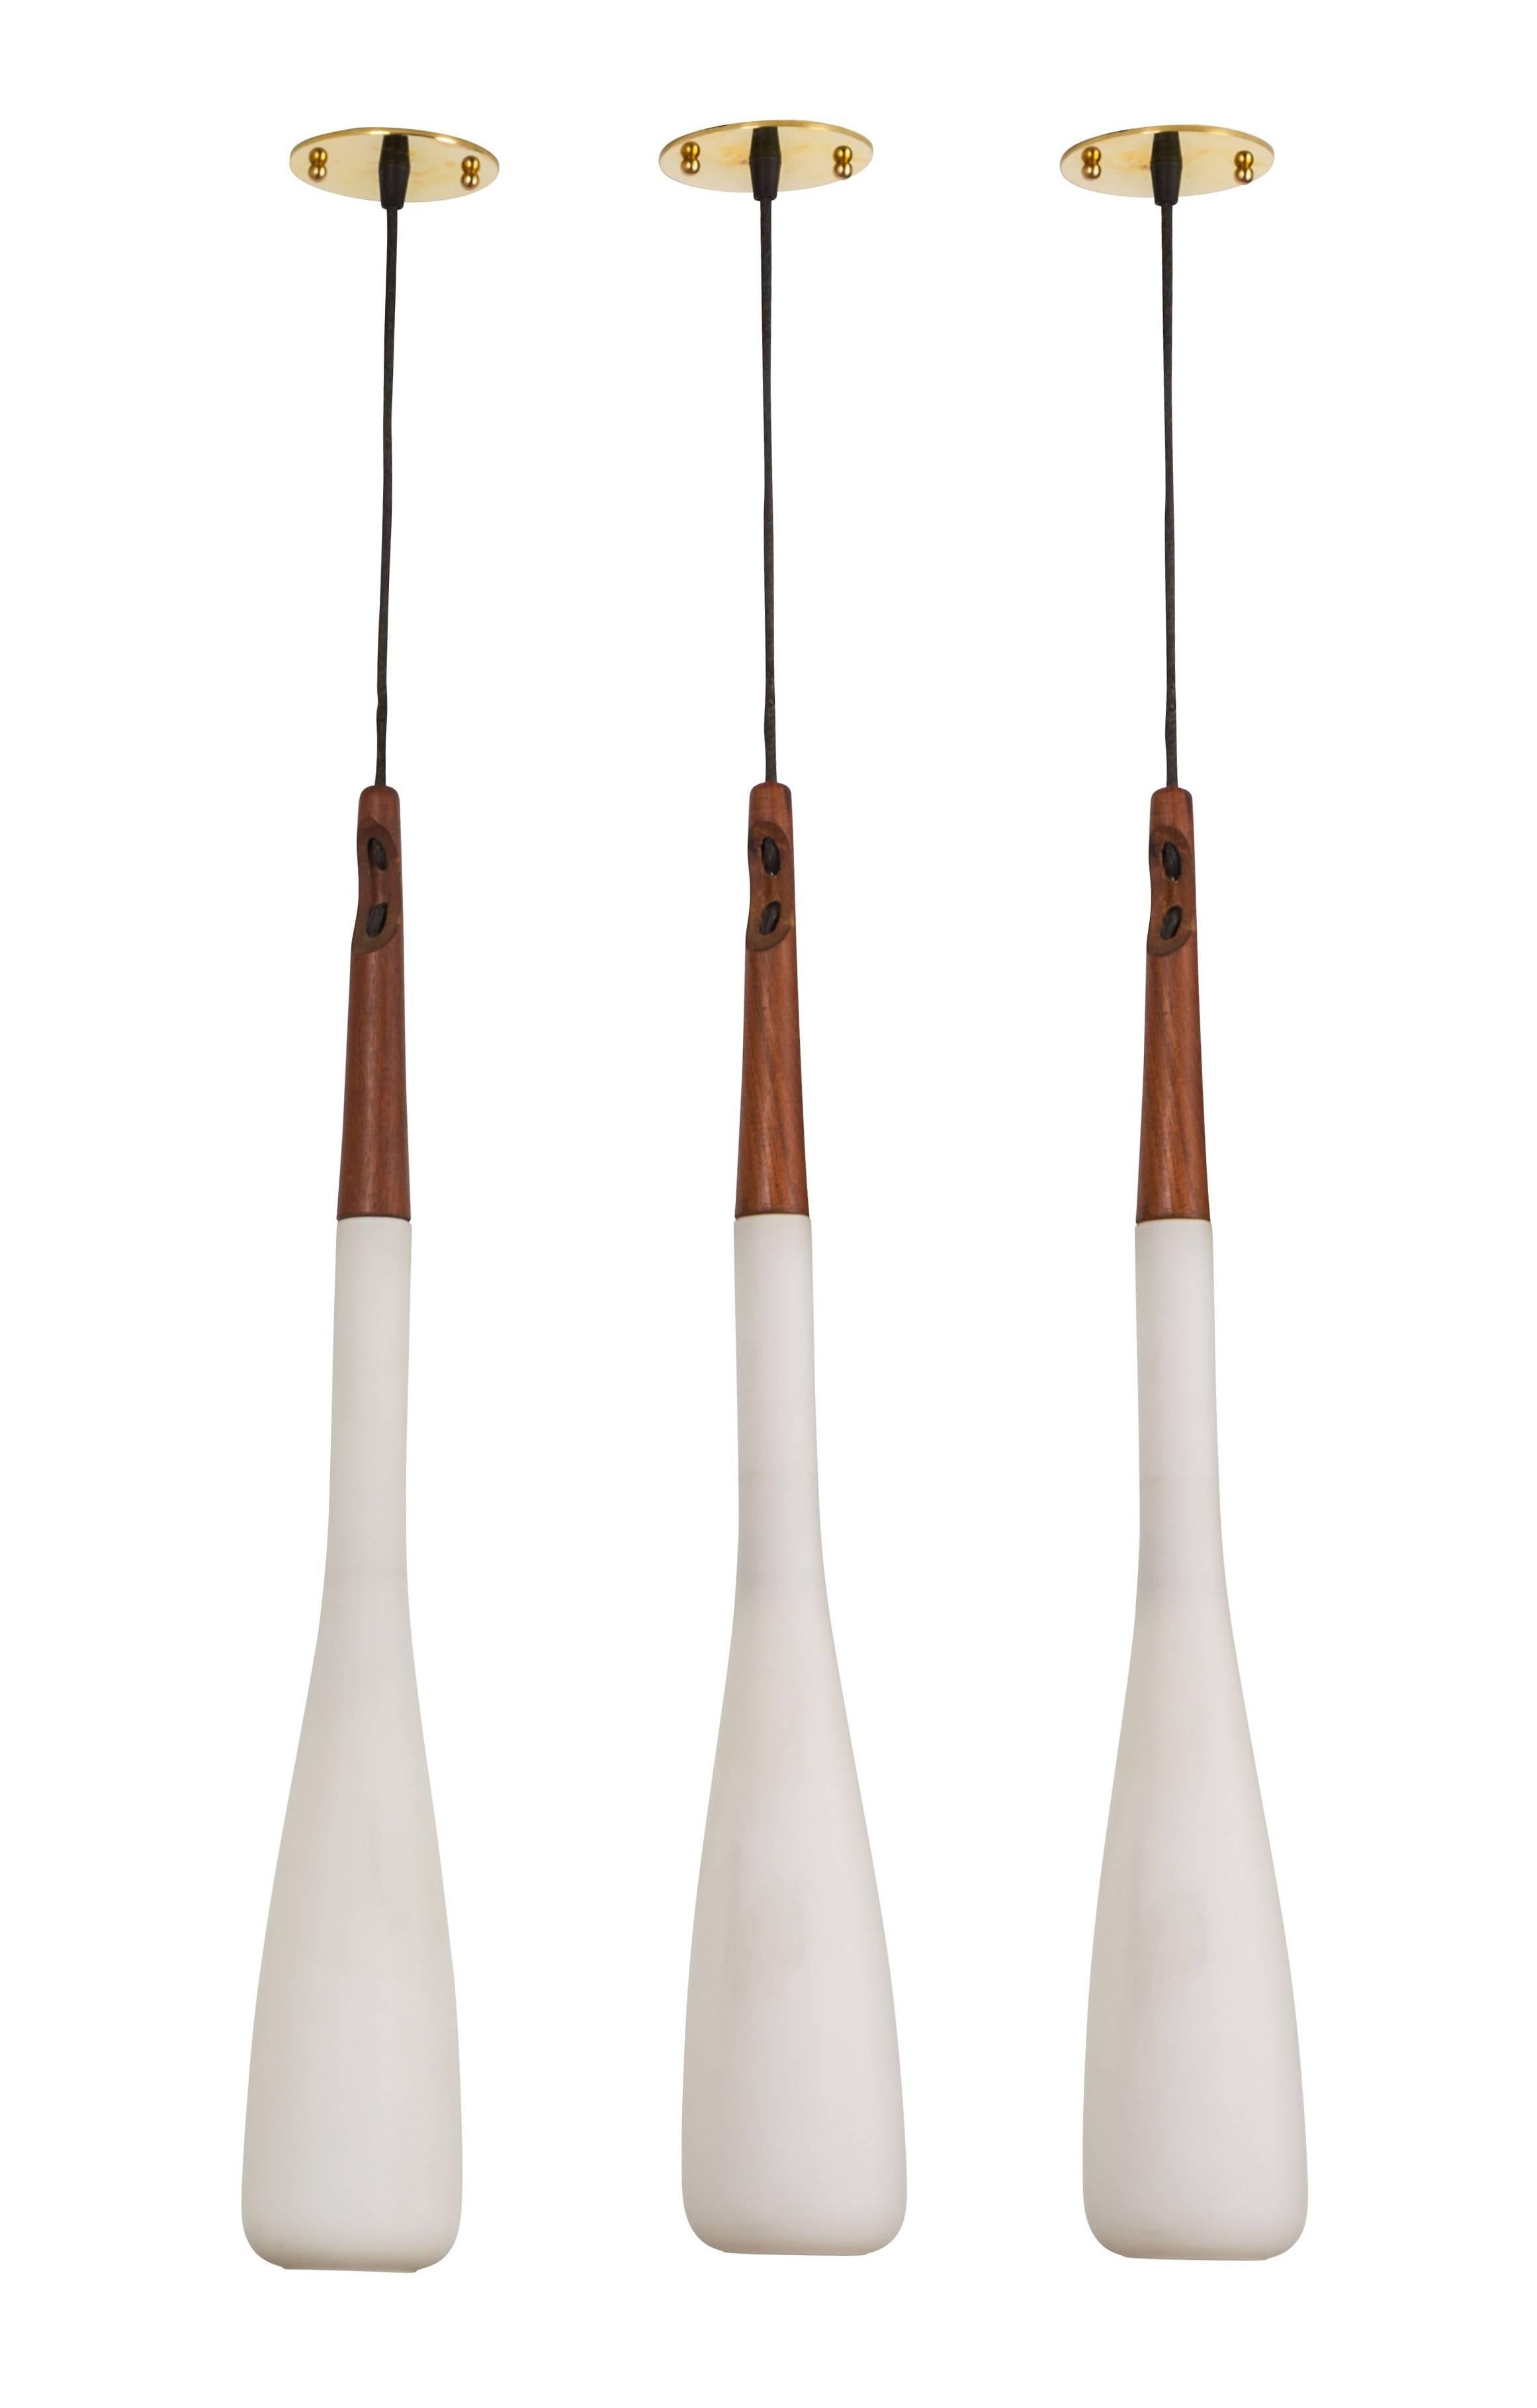 Molded white brushed satin glass pendants with teak stems designed by Uno & Osten Kristiansson. Custom backplates and original cloth cords. Priced to be sold individually. Overall drop can be customized. Each pendant takes an E27 40w maximum bulb.